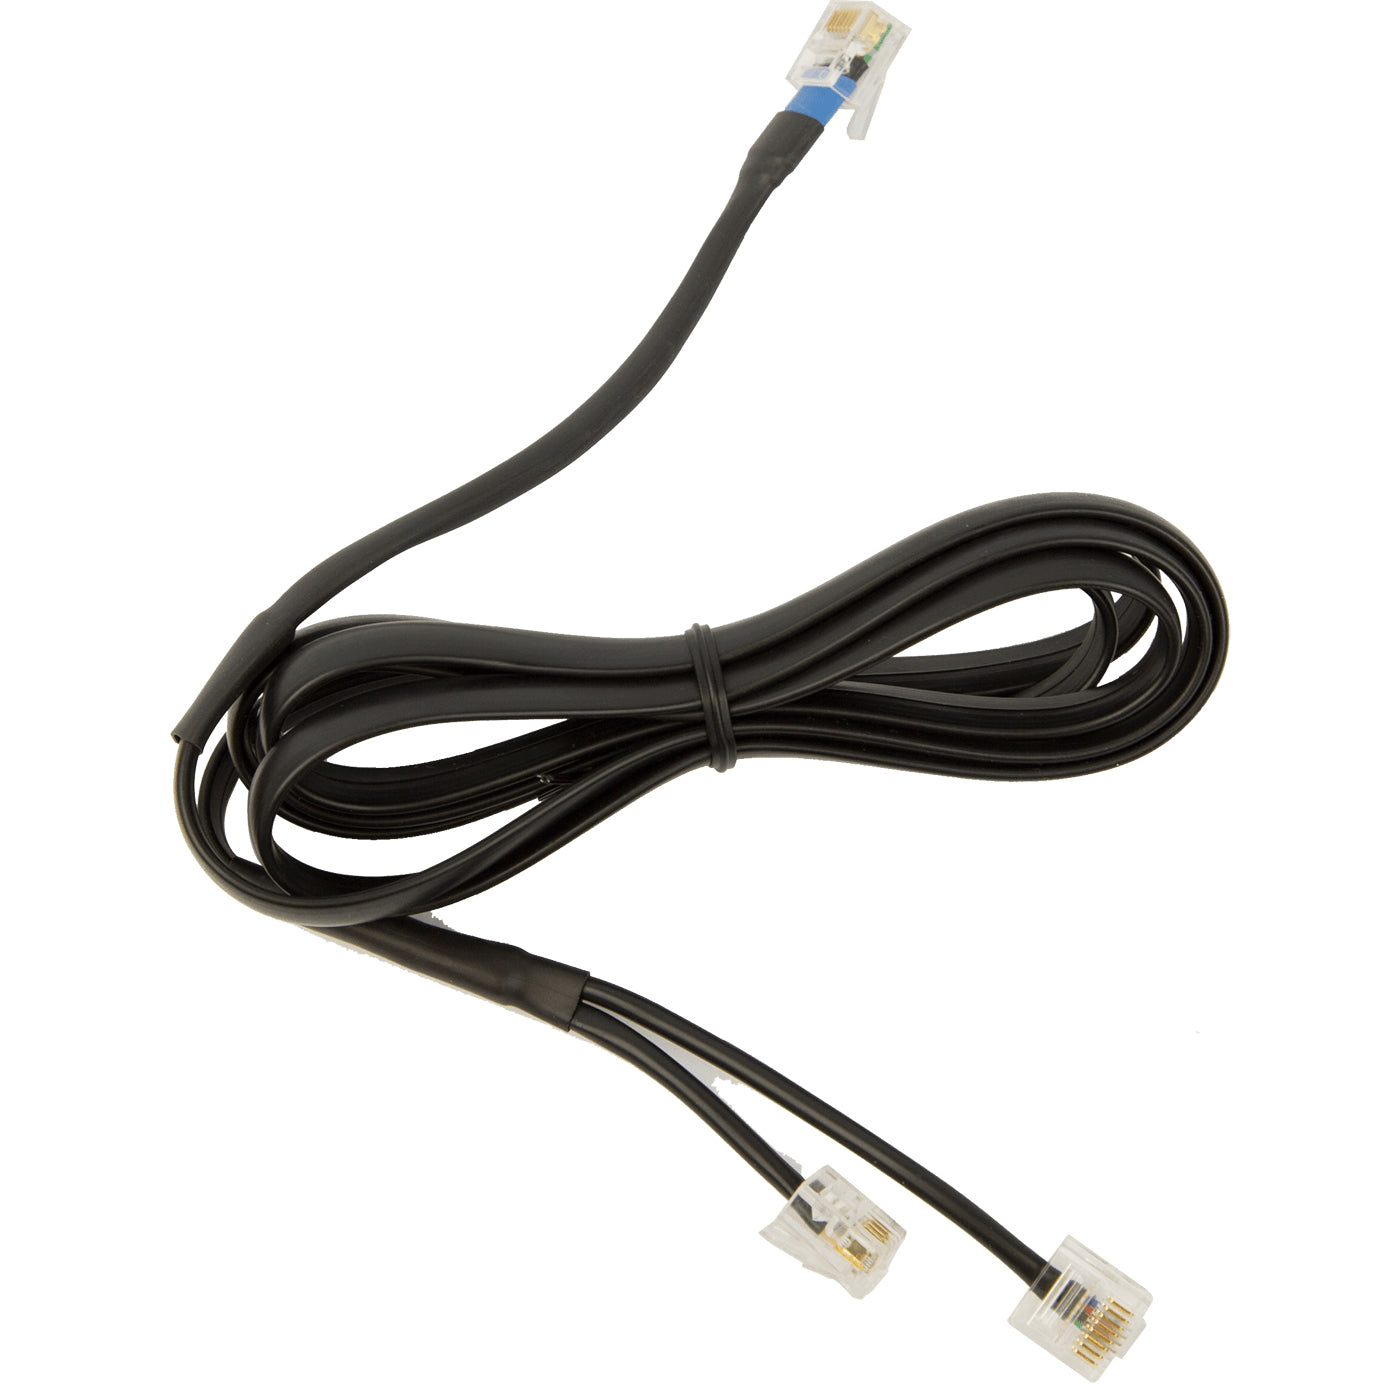 DHSG cable